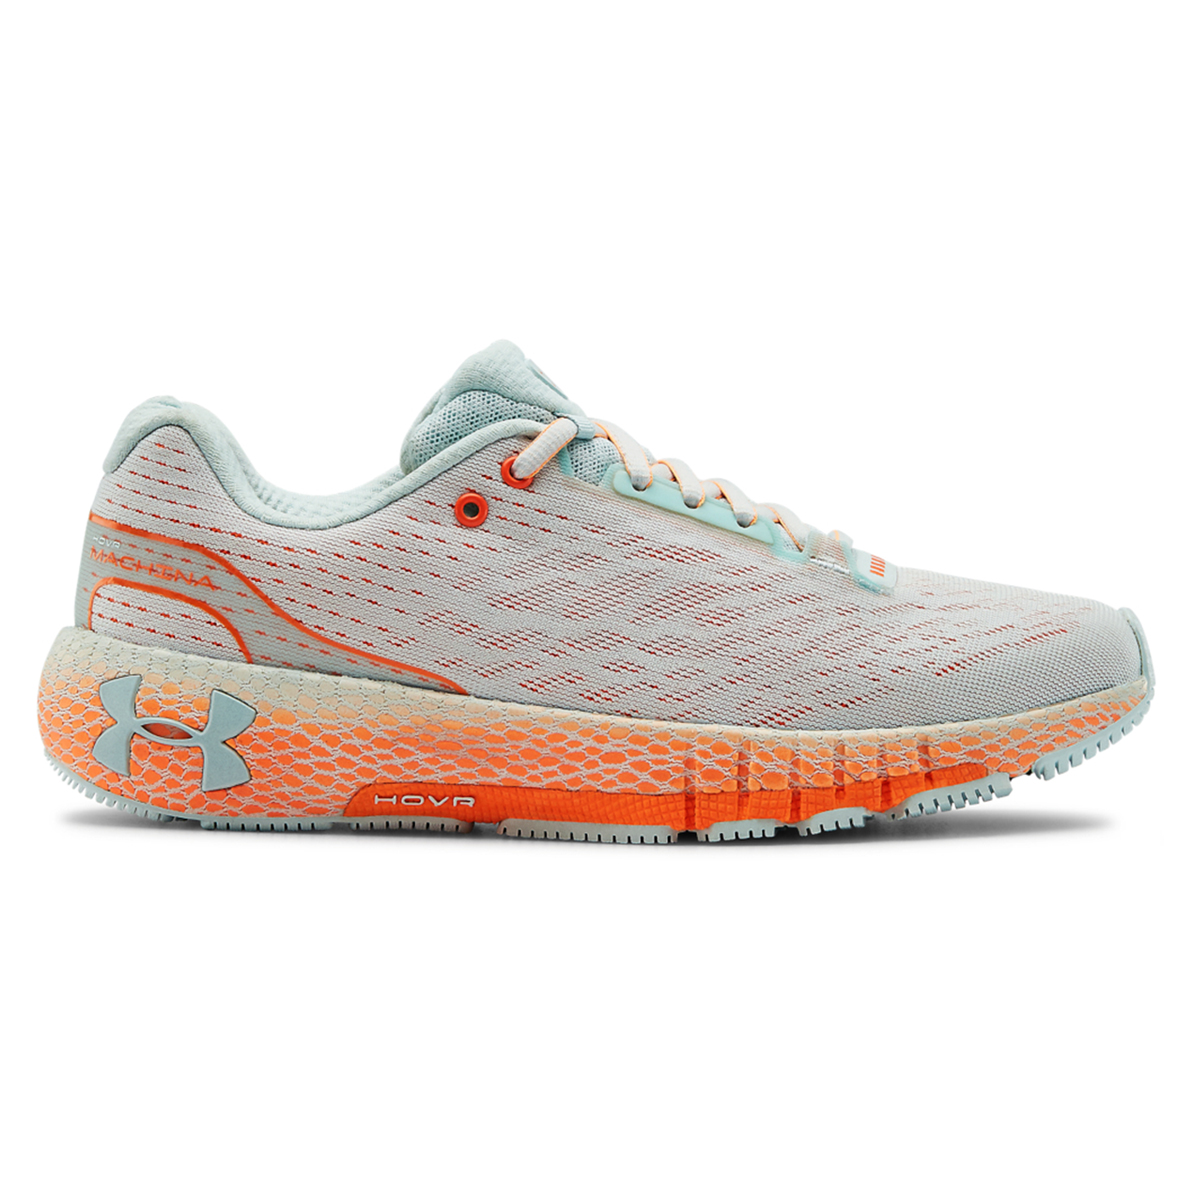 Zapatillas Under Armour Hovr Machina,  image number null